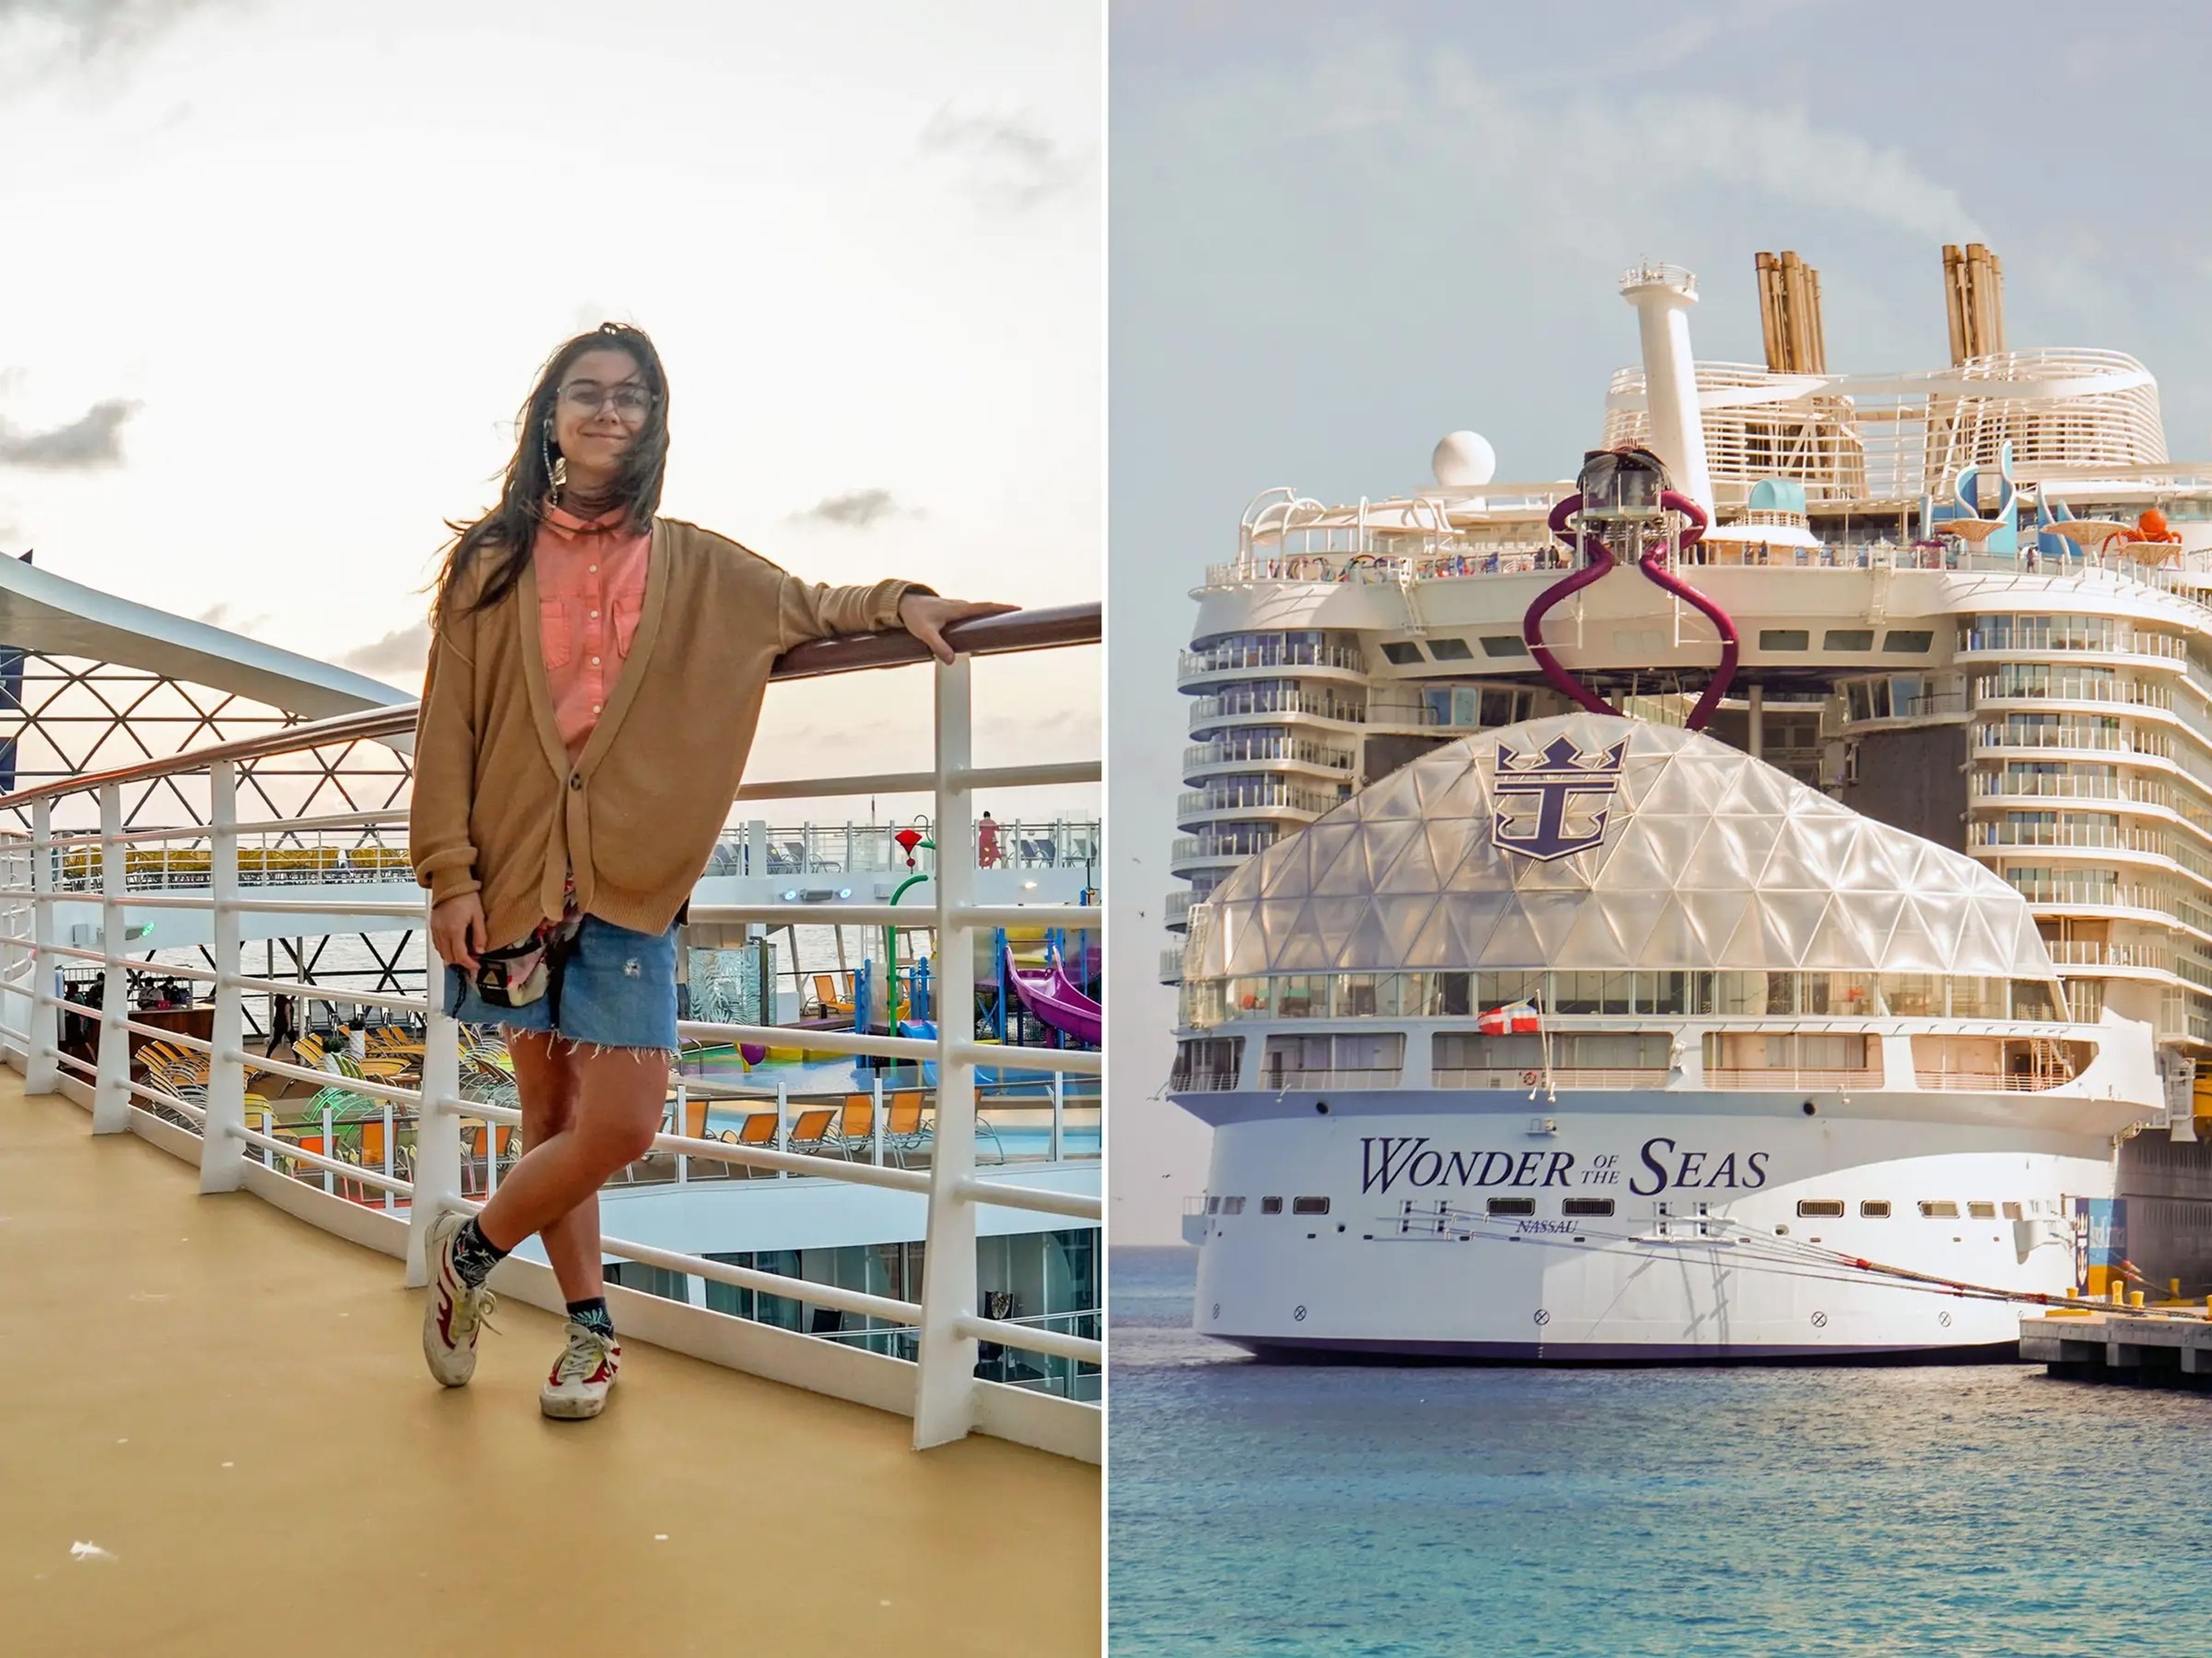 The author took her first cruise on the largest cruise ship in the world, Wonder of the Seas.